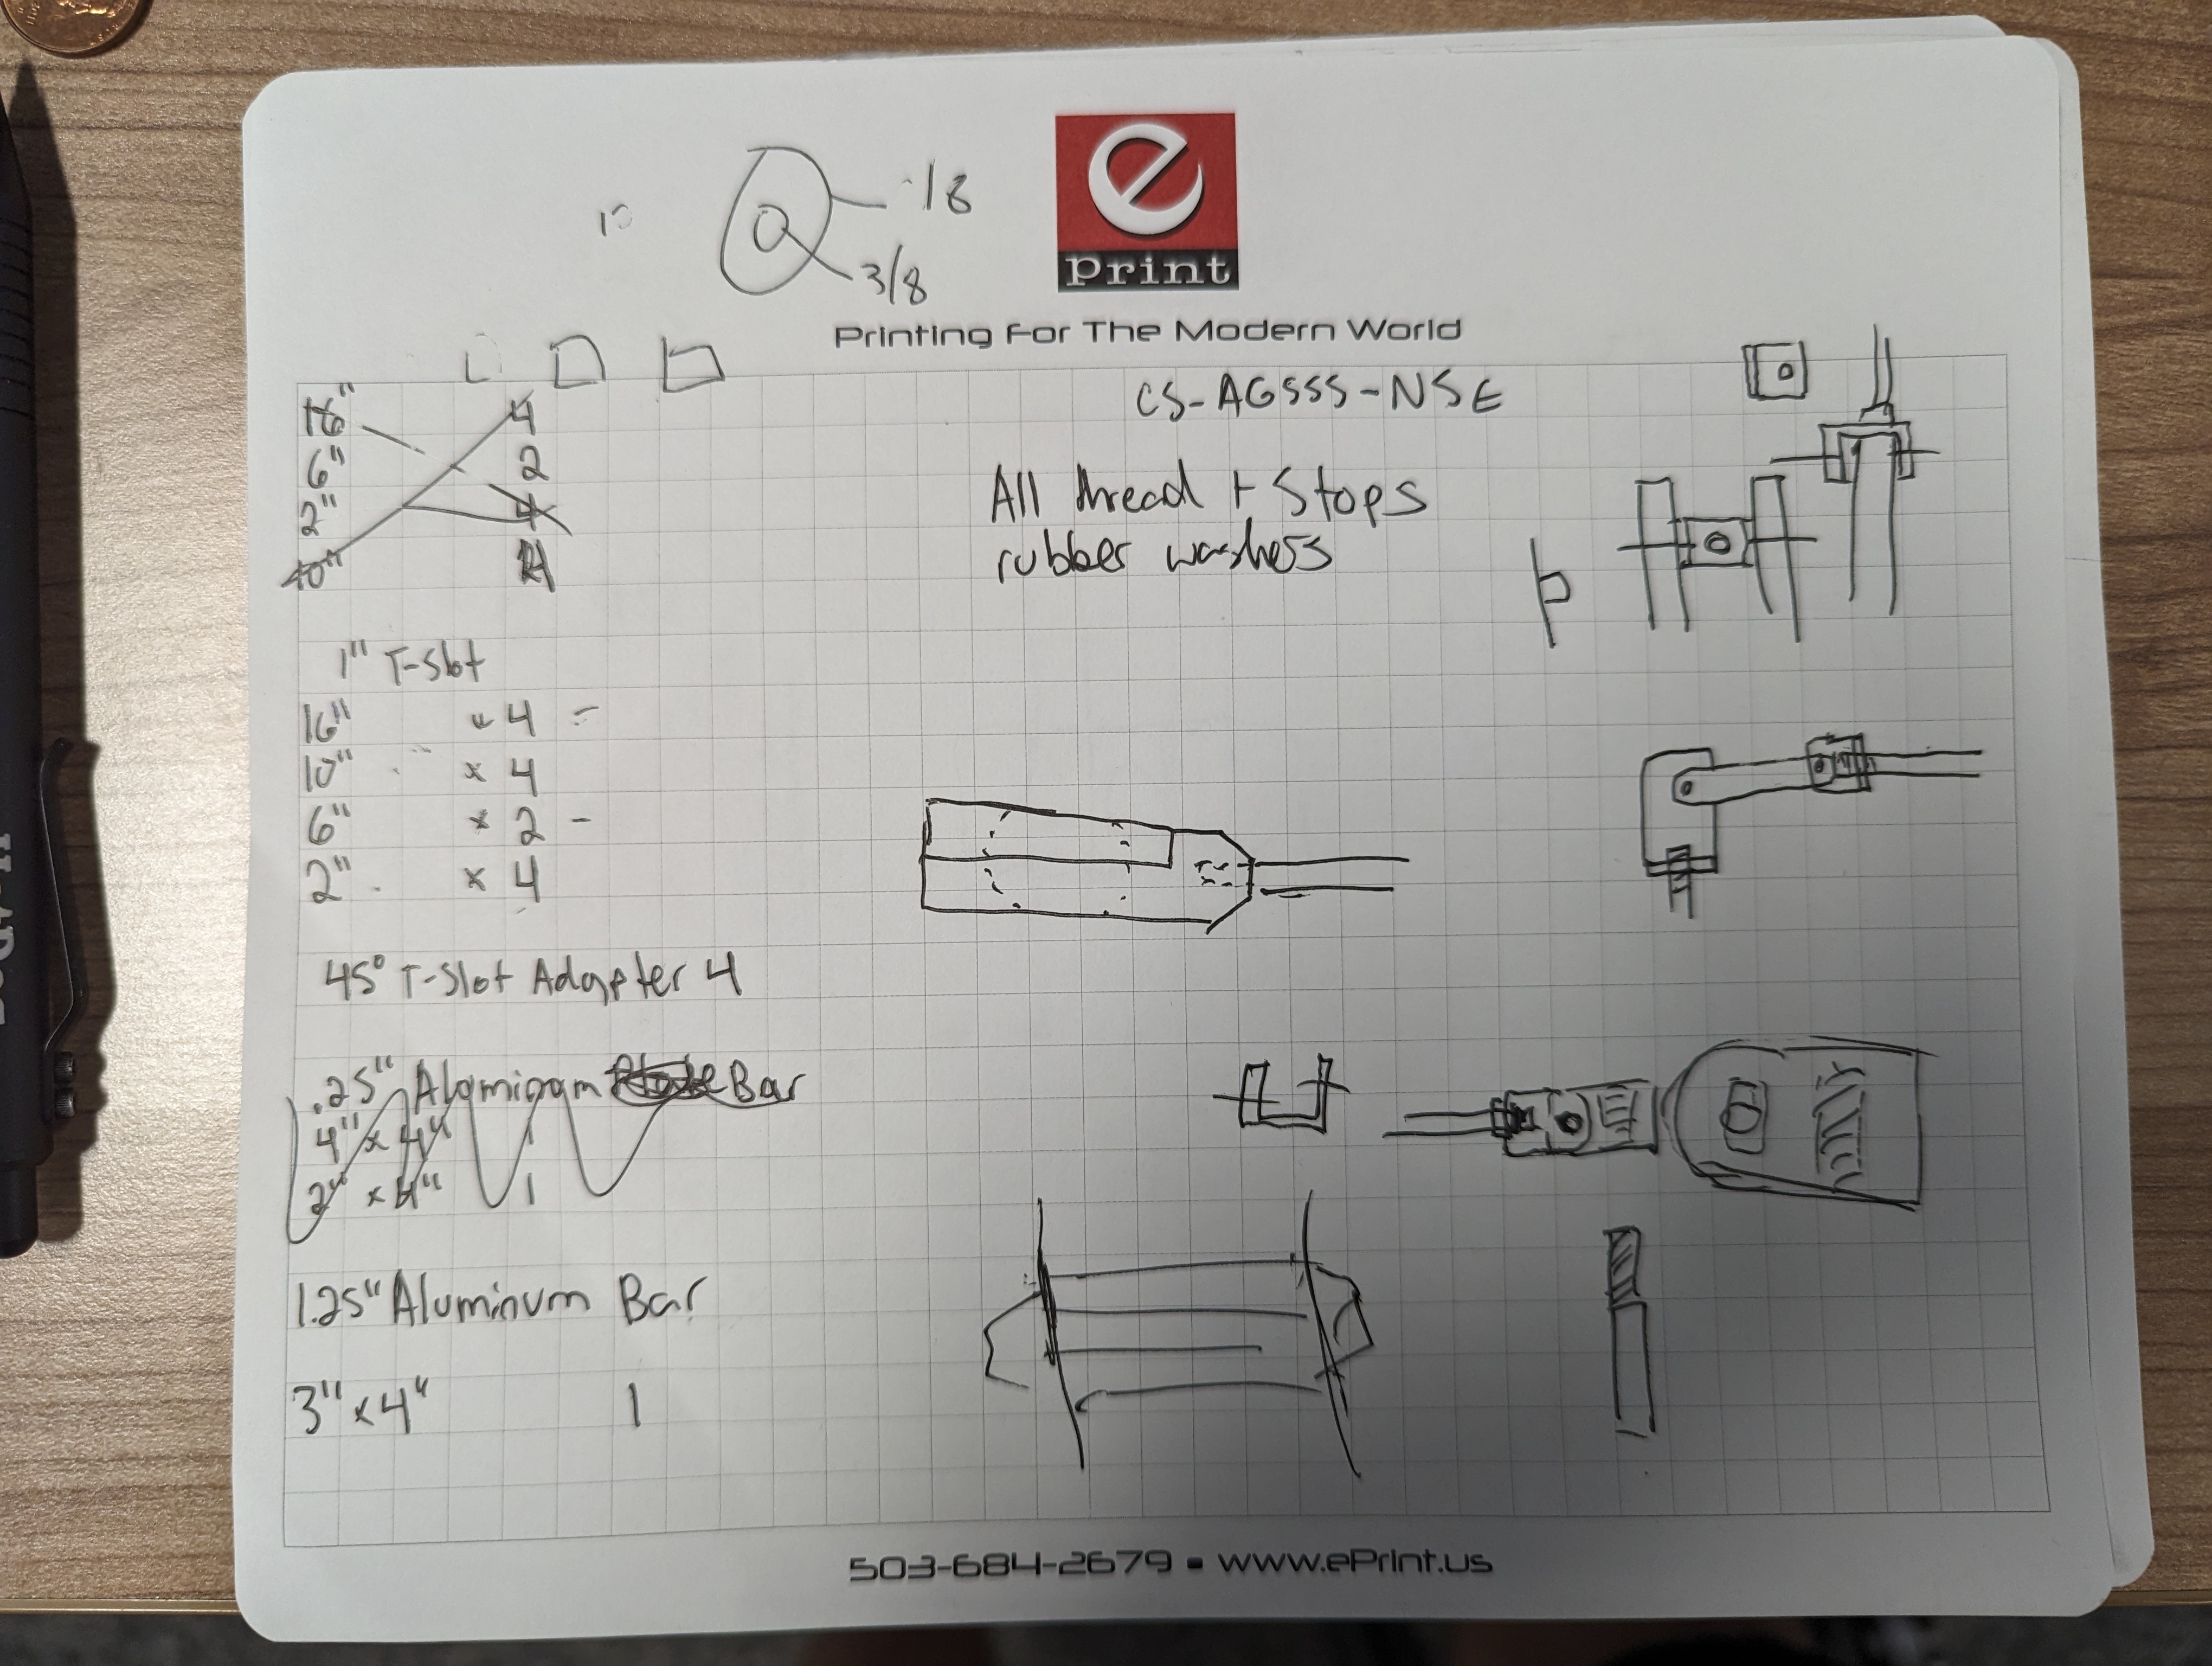 Preliminary brainstorming sketches for the design of the shifter machine